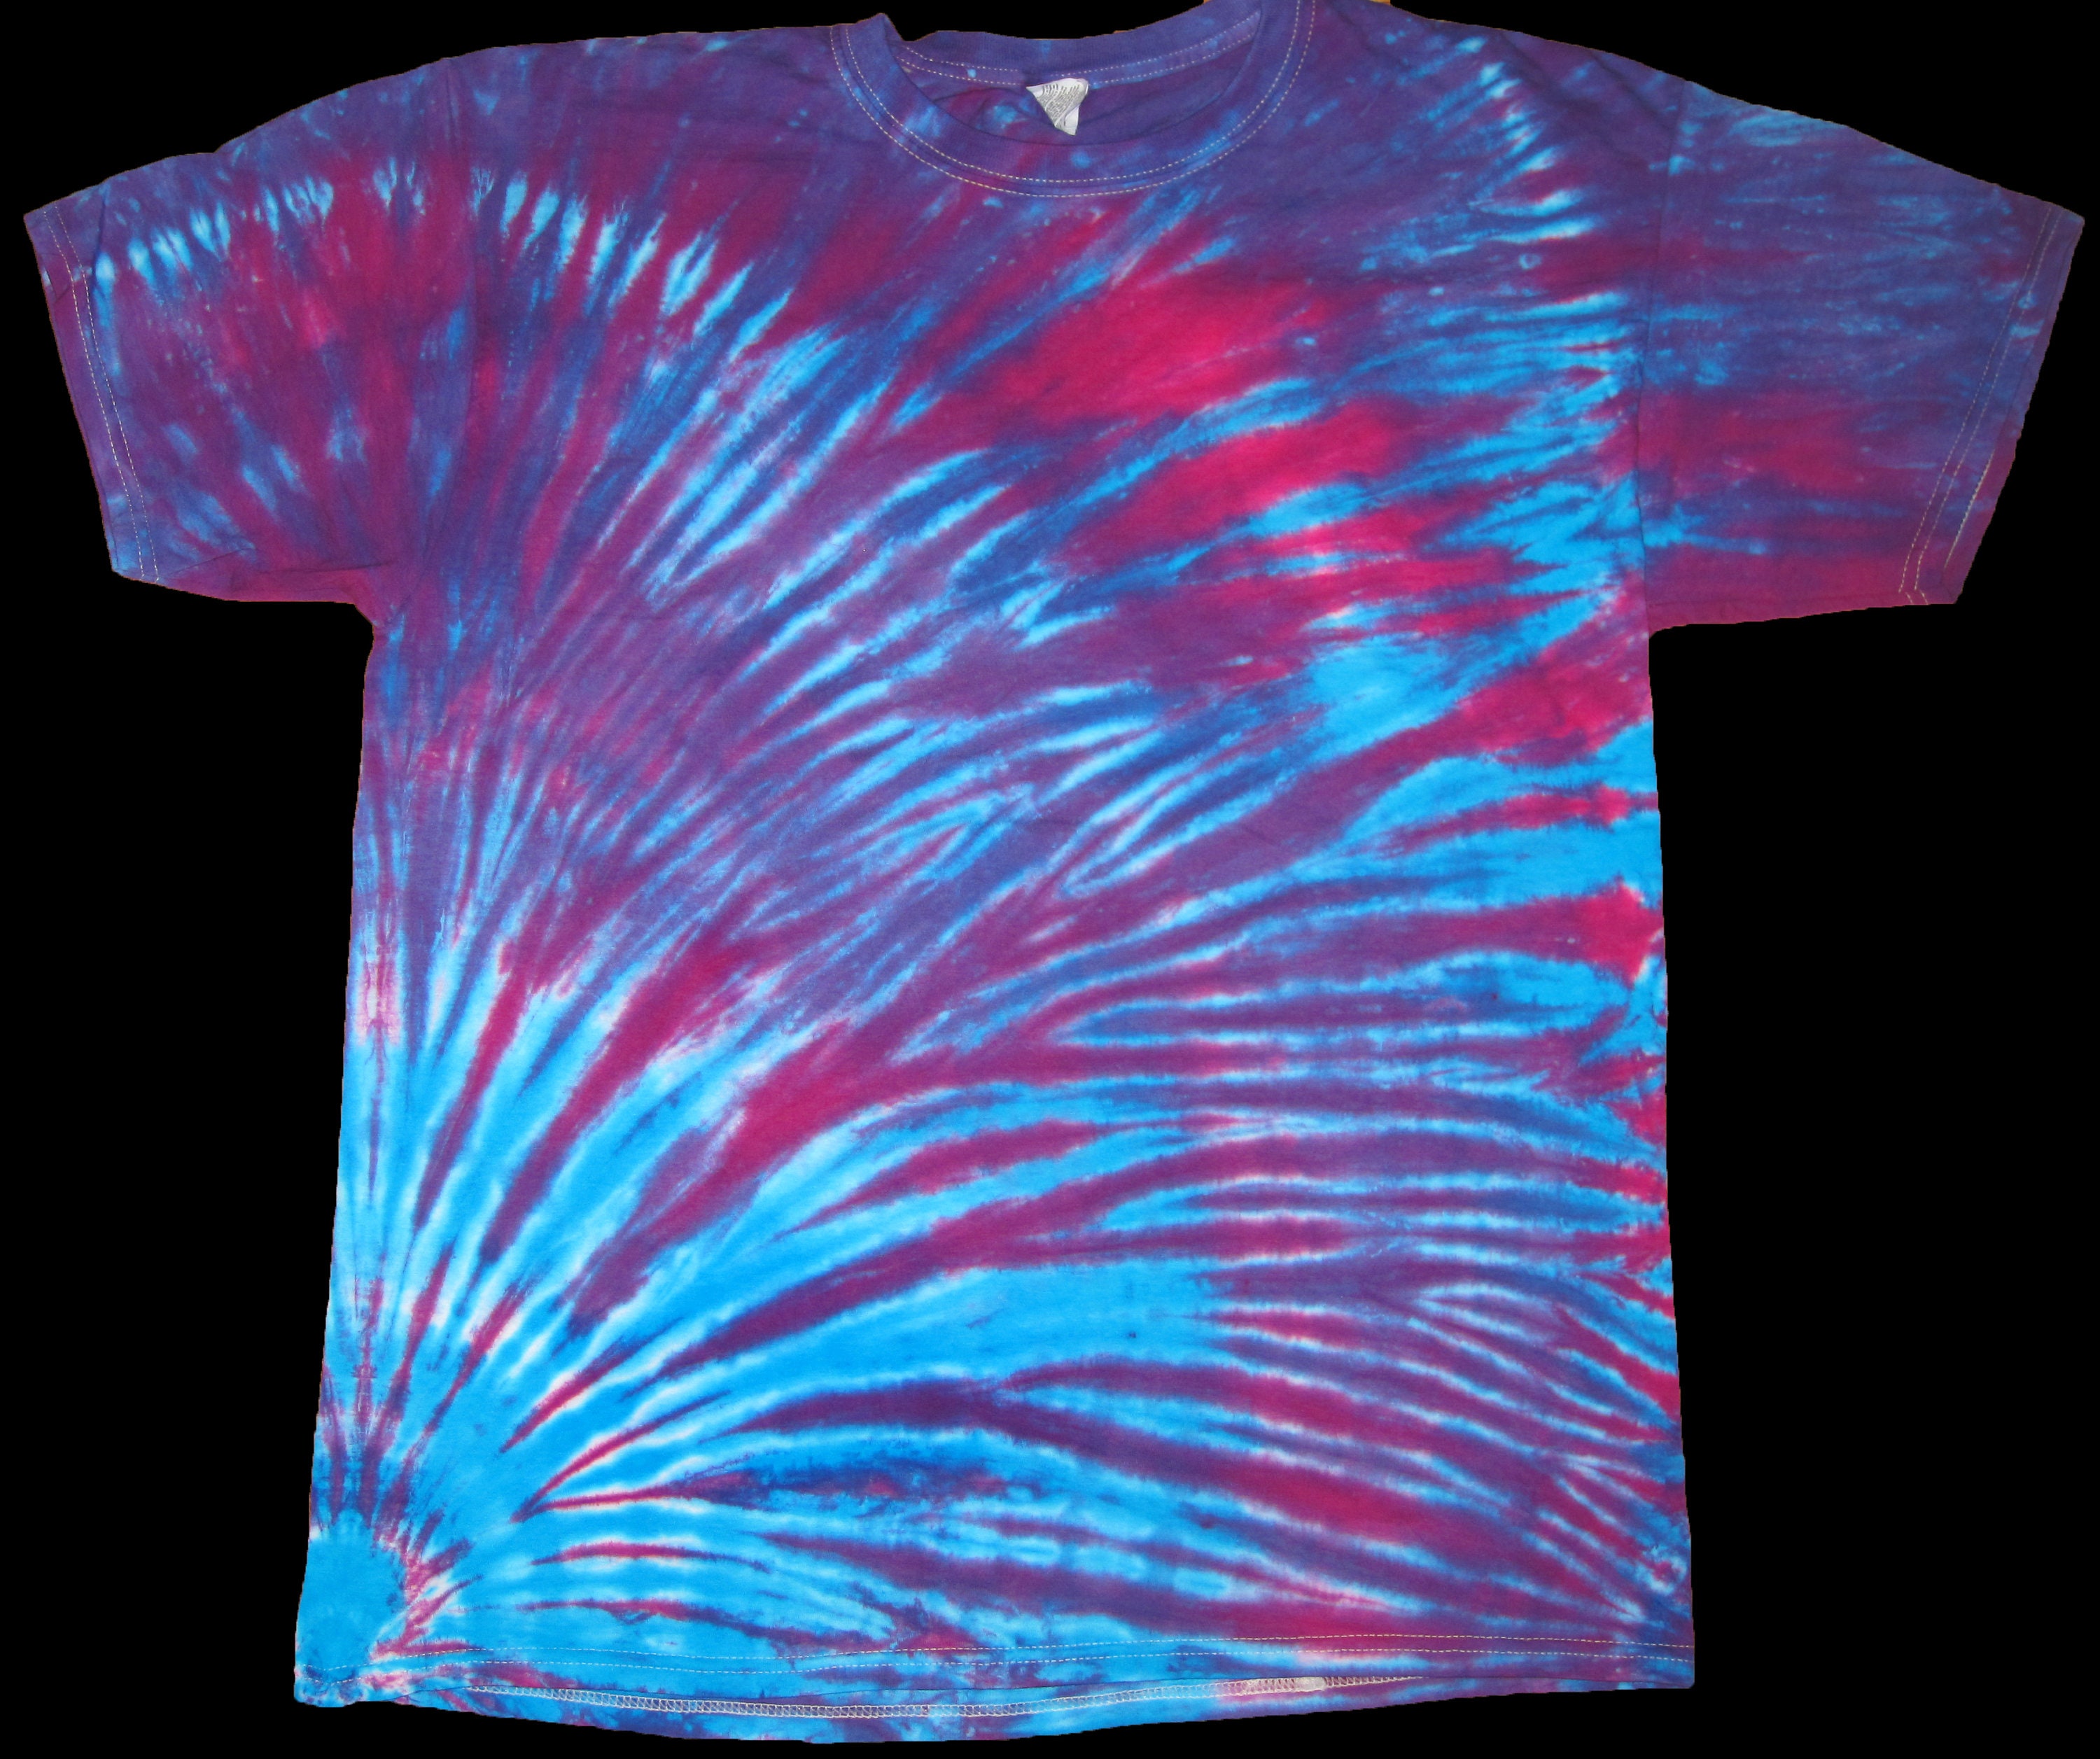 How To Make Tie Dye Shirts Heart Coolmine Community School - how do make shirts on roblox coolmine community school